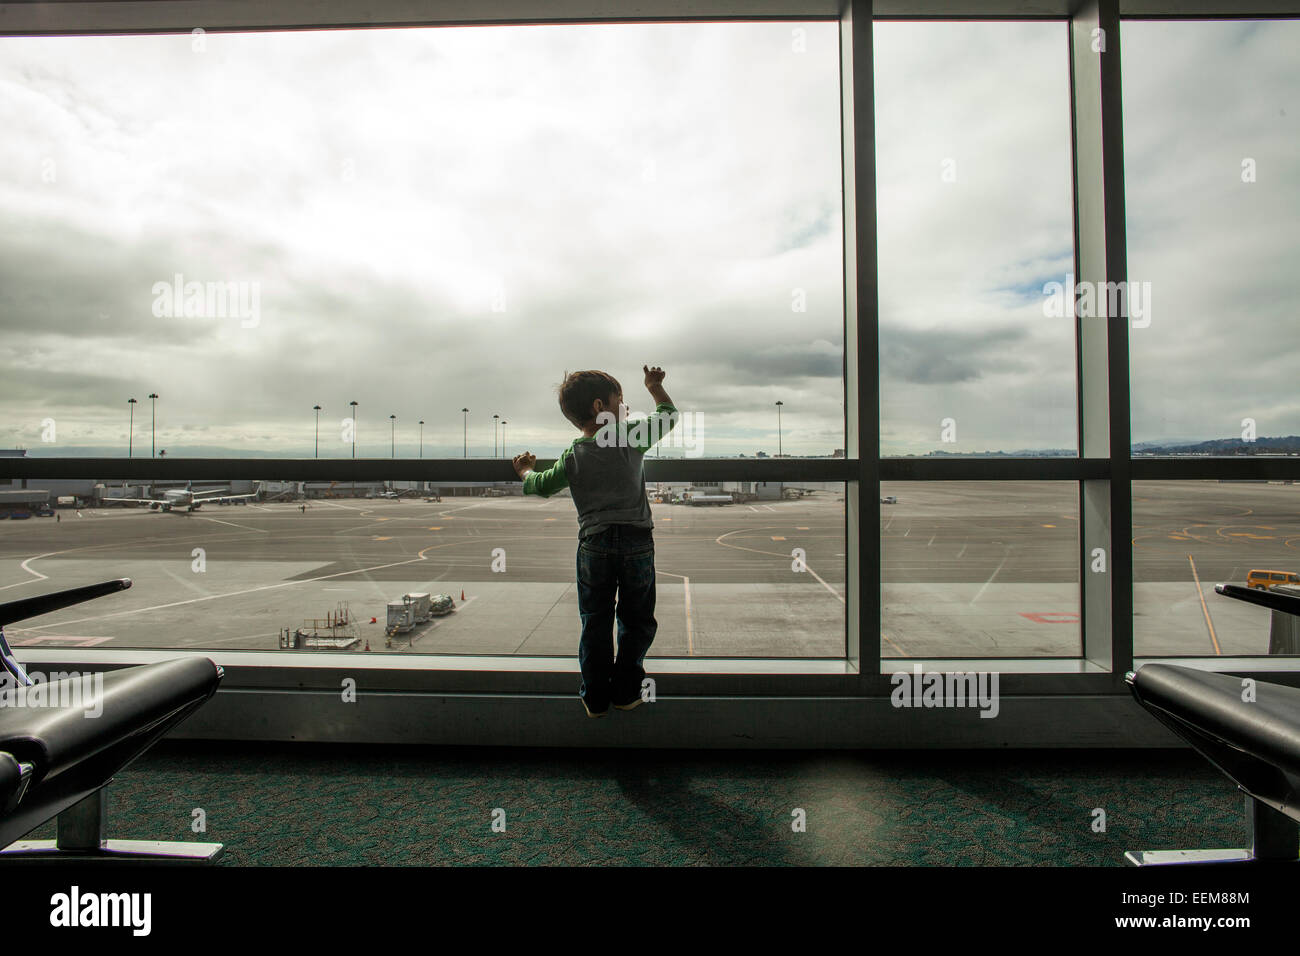 Mixed Race boy looking out window airport Banque D'Images